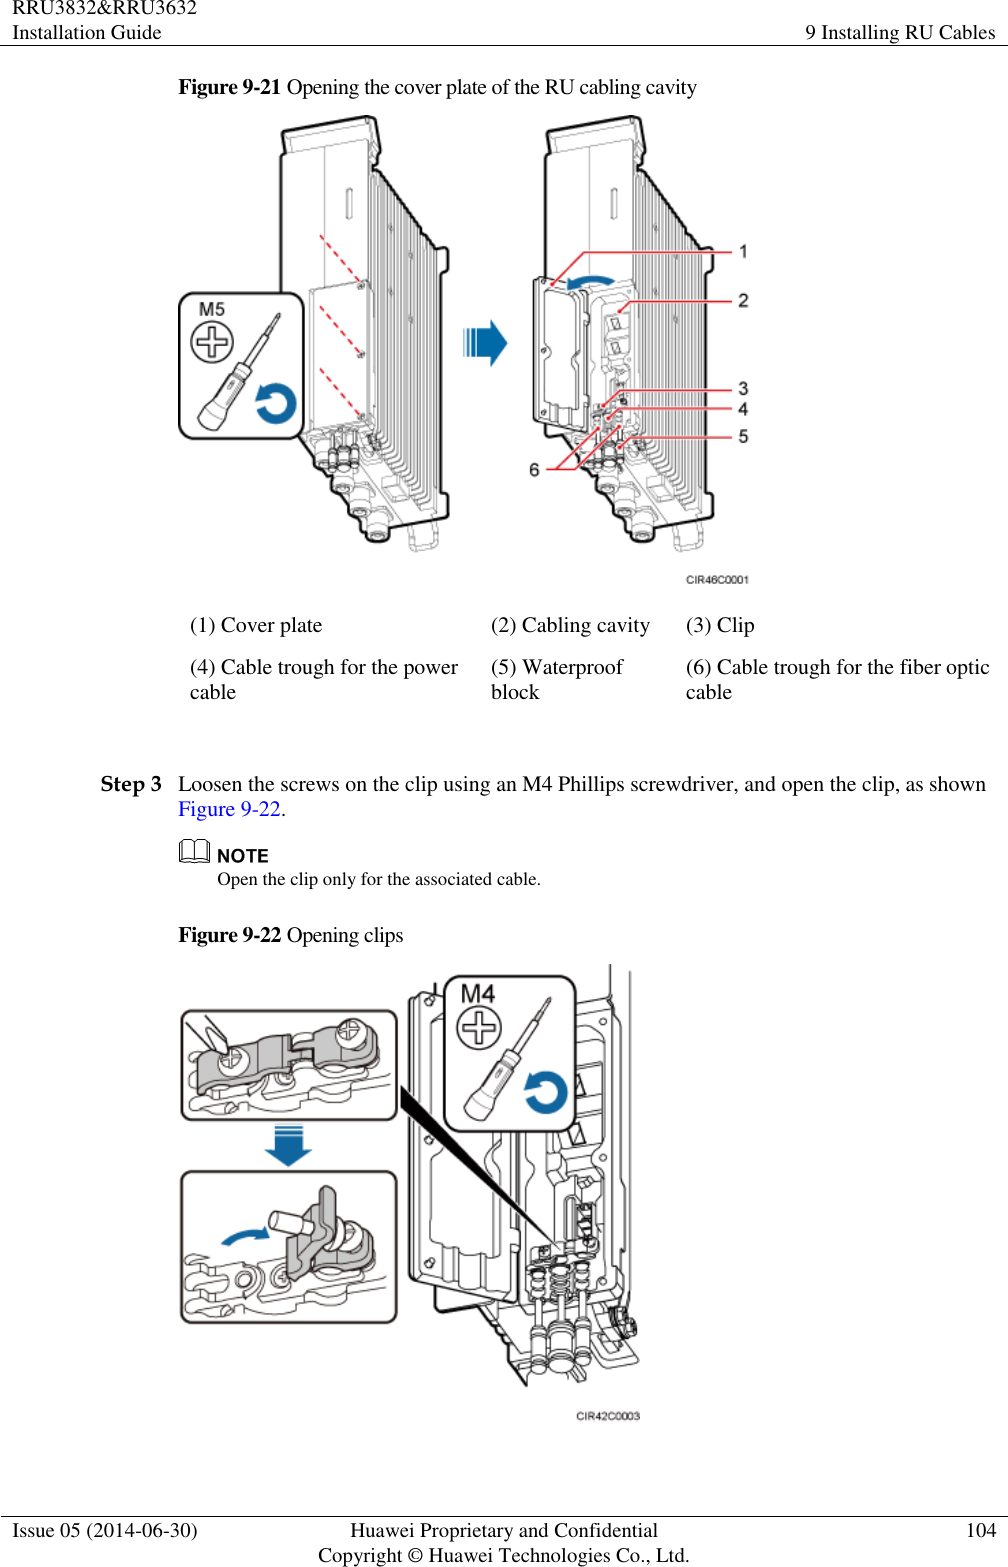 RRU3832&amp;RRU3632 Installation Guide 9 Installing RU Cables  Issue 05 (2014-06-30) Huawei Proprietary and Confidential                                     Copyright © Huawei Technologies Co., Ltd. 104  Figure 9-21 Opening the cover plate of the RU cabling cavity  (1) Cover plate (2) Cabling cavity (3) Clip (4) Cable trough for the power cable (5) Waterproof block (6) Cable trough for the fiber optic cable  Step 3 Loosen the screws on the clip using an M4 Phillips screwdriver, and open the clip, as shown Figure 9-22.  Open the clip only for the associated cable. Figure 9-22 Opening clips   